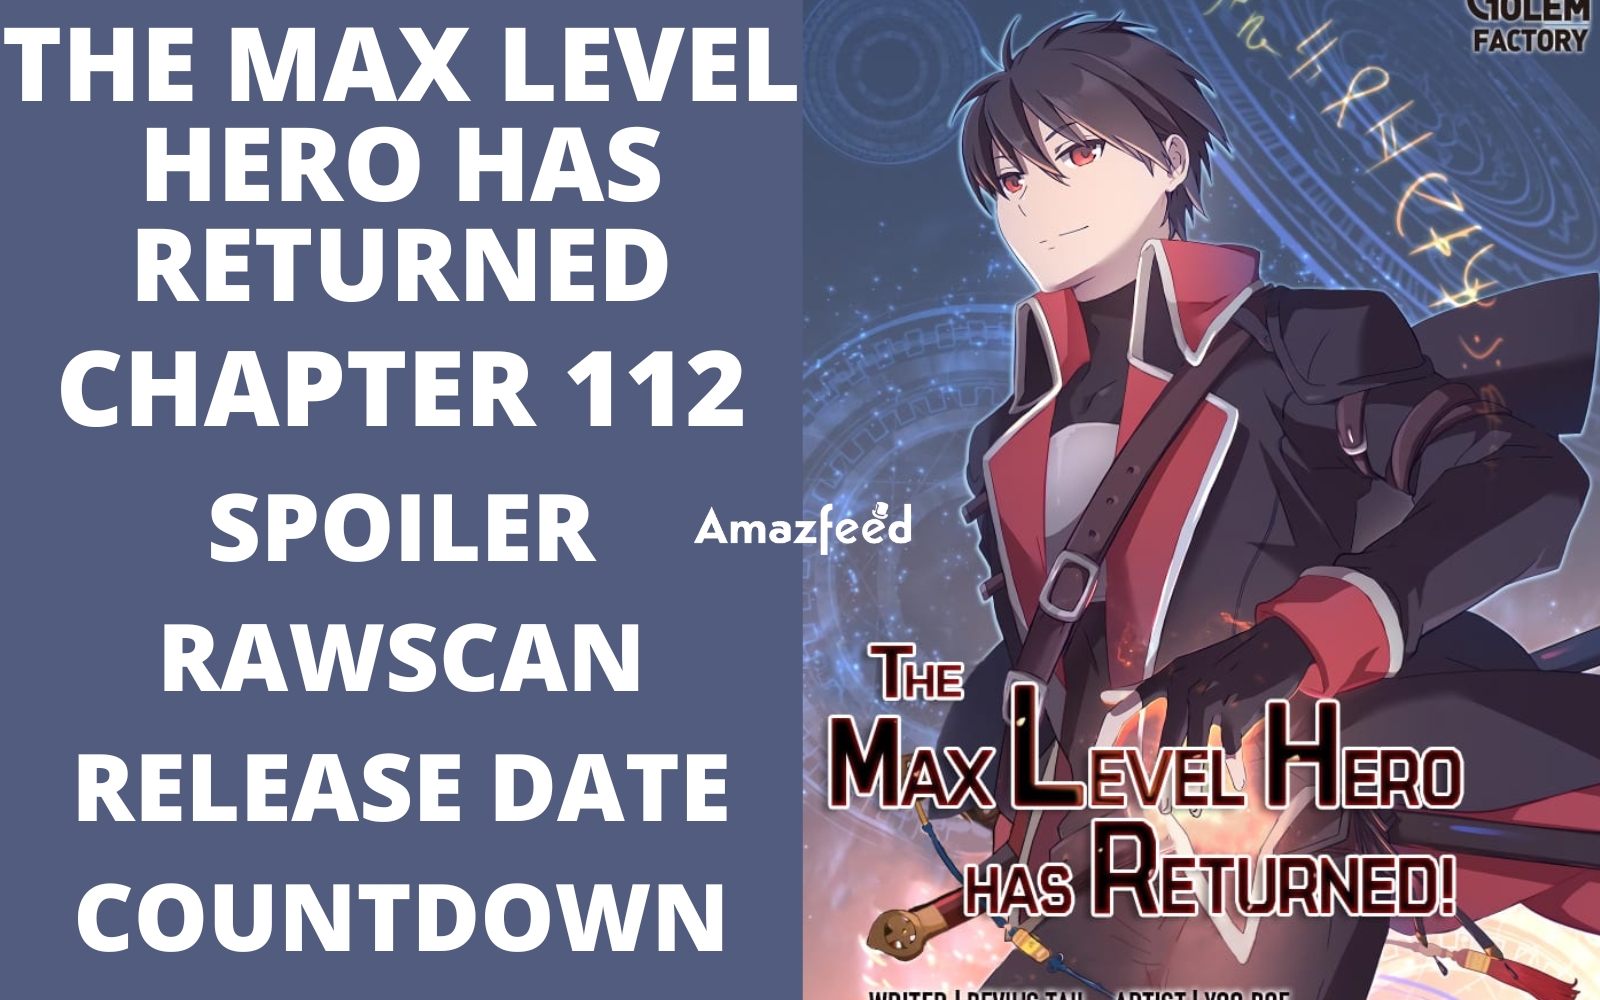 The Max Level Hero Has Returned Chapter 112 Spoiler, Release Date, Raw Scan, Countdown, Color Page